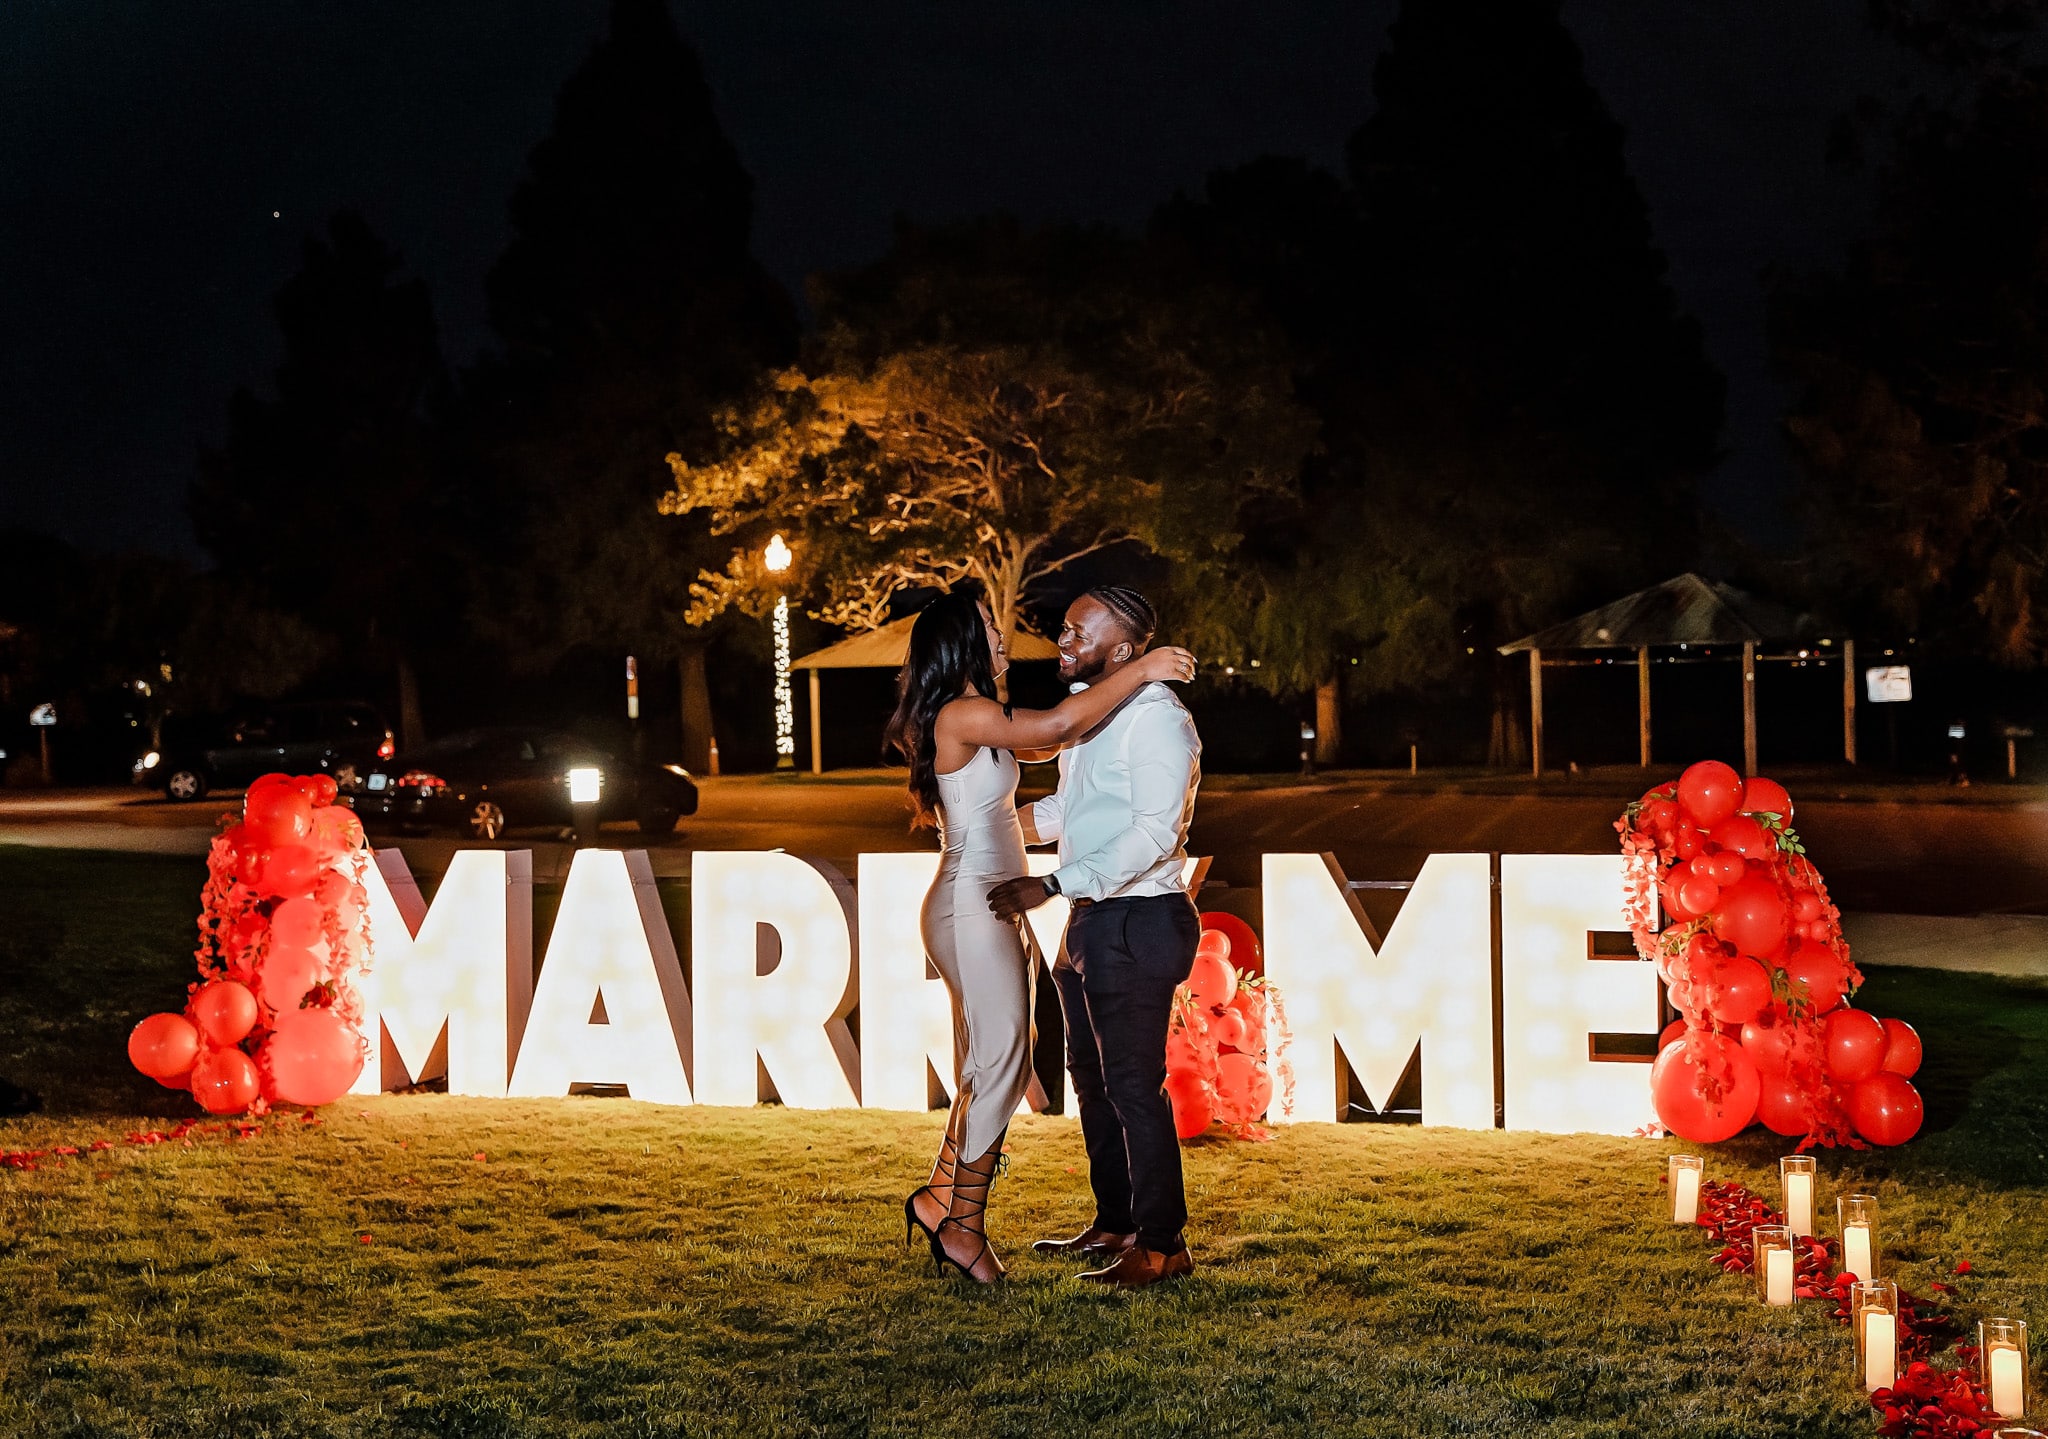 A man and a woman embracing in from of a light up letter display that reads "MARRY ME"